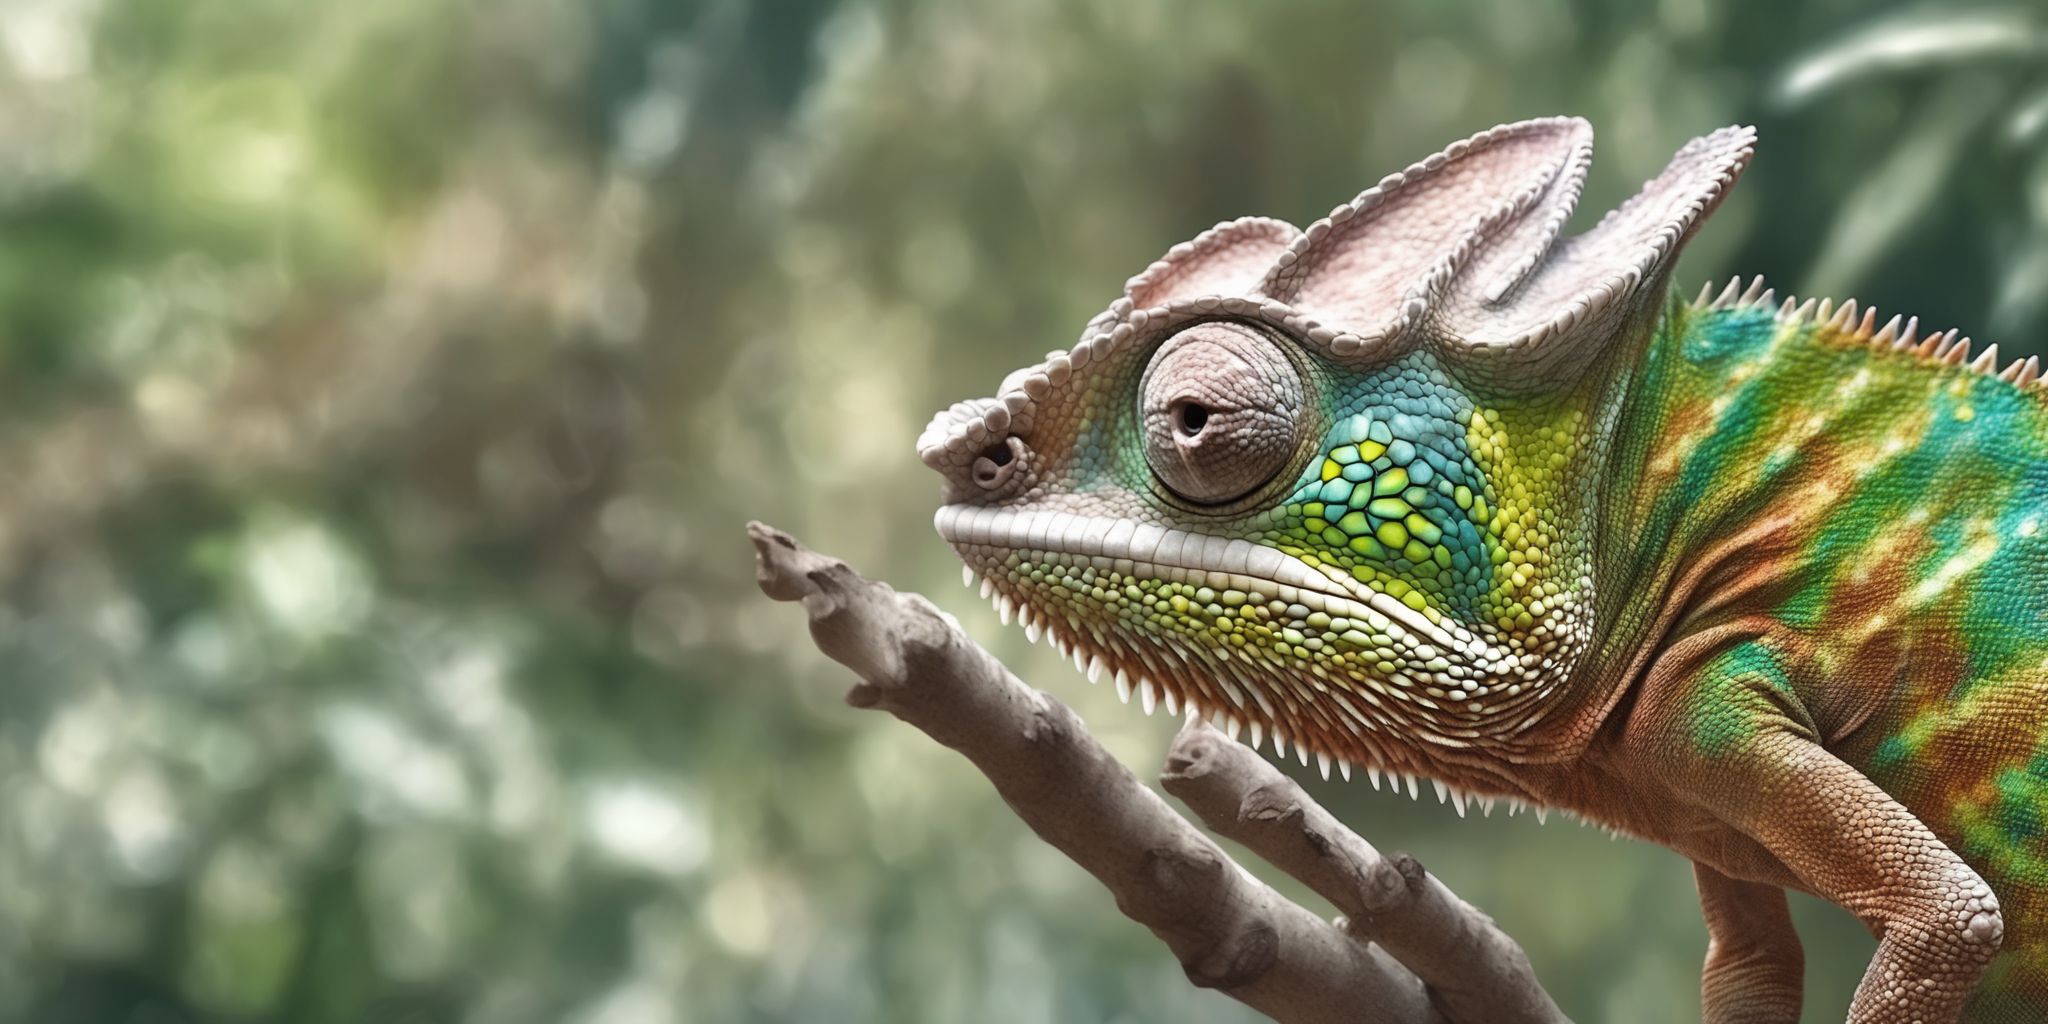 Chameleon  in realistic, photographic style